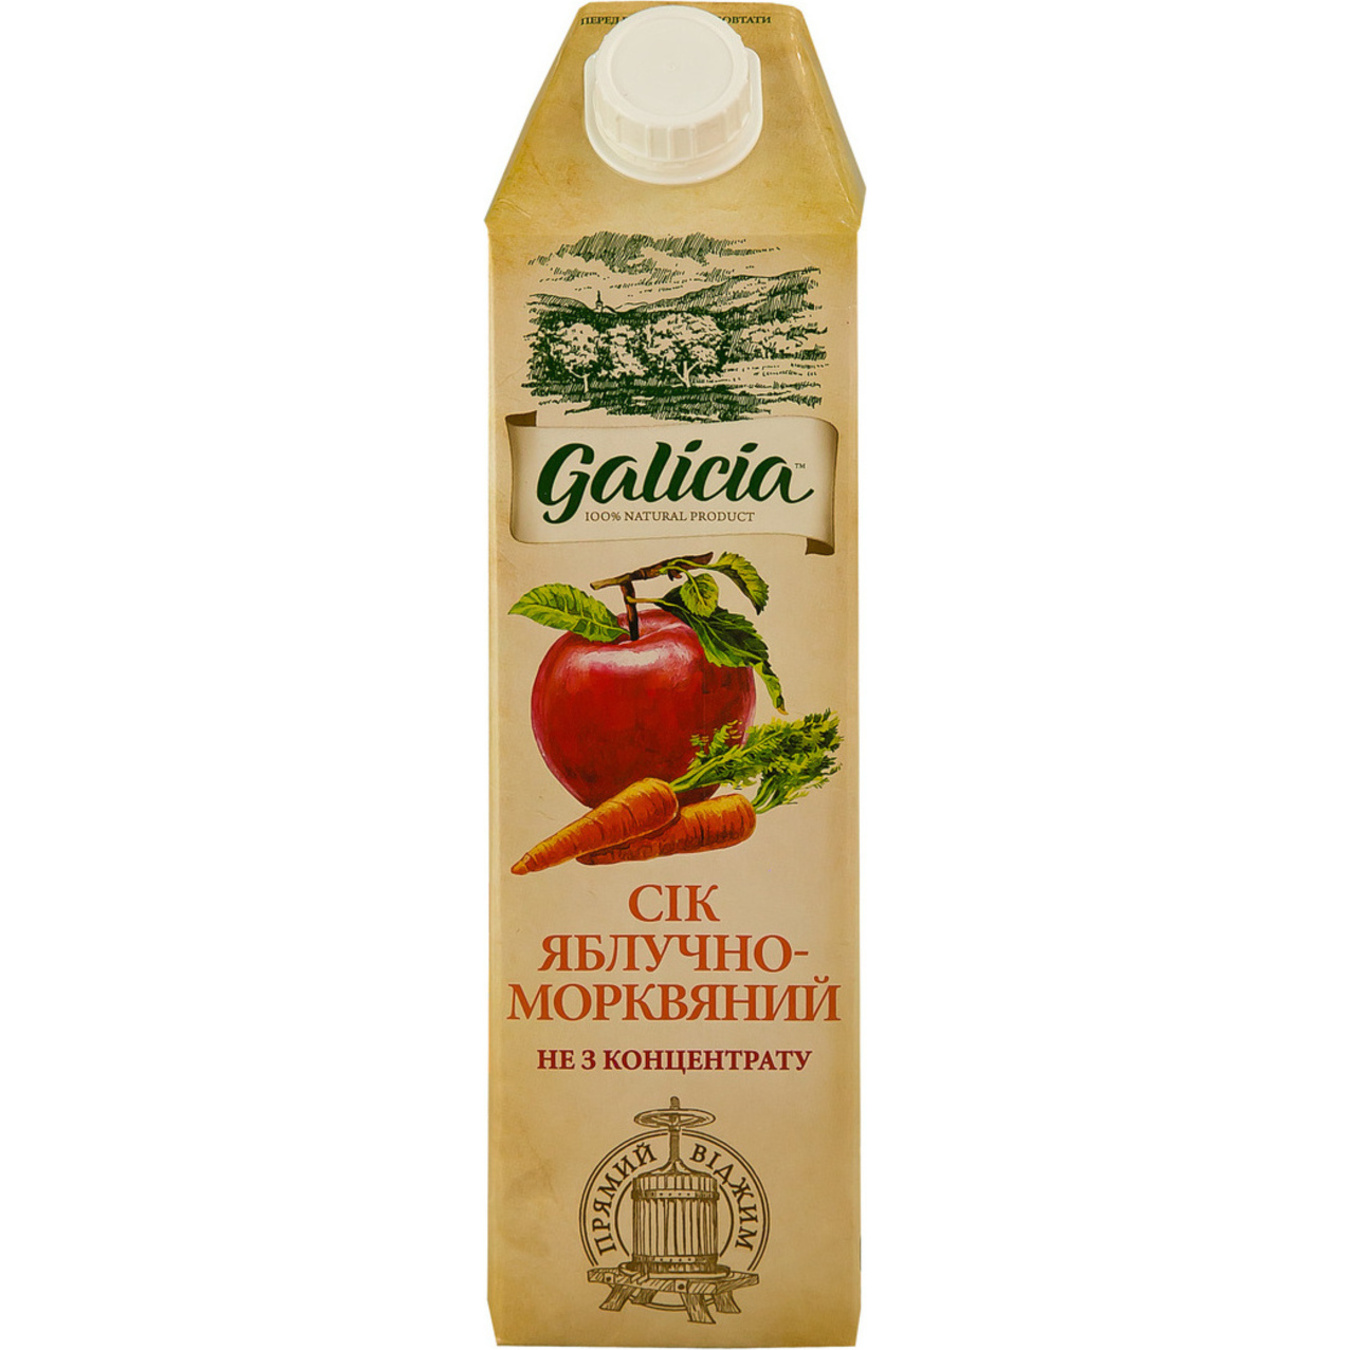 Galicia Apple-Carrot Juice with Pulp 1l